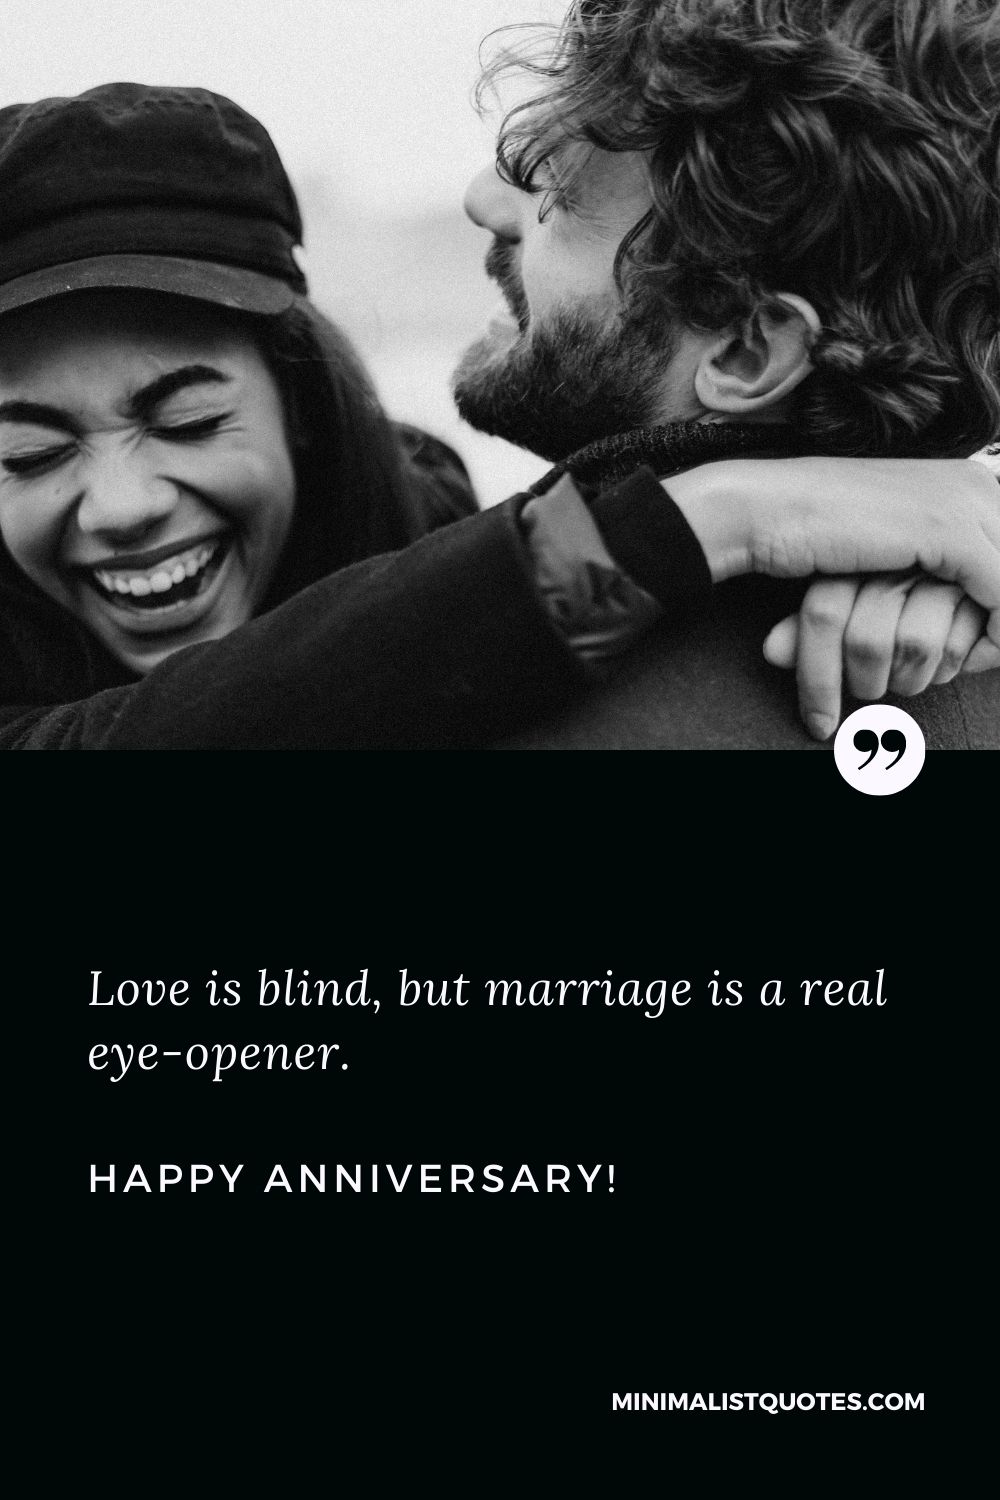 Love is blind, but marriage is a real eye-opener. Happy Anniversary!